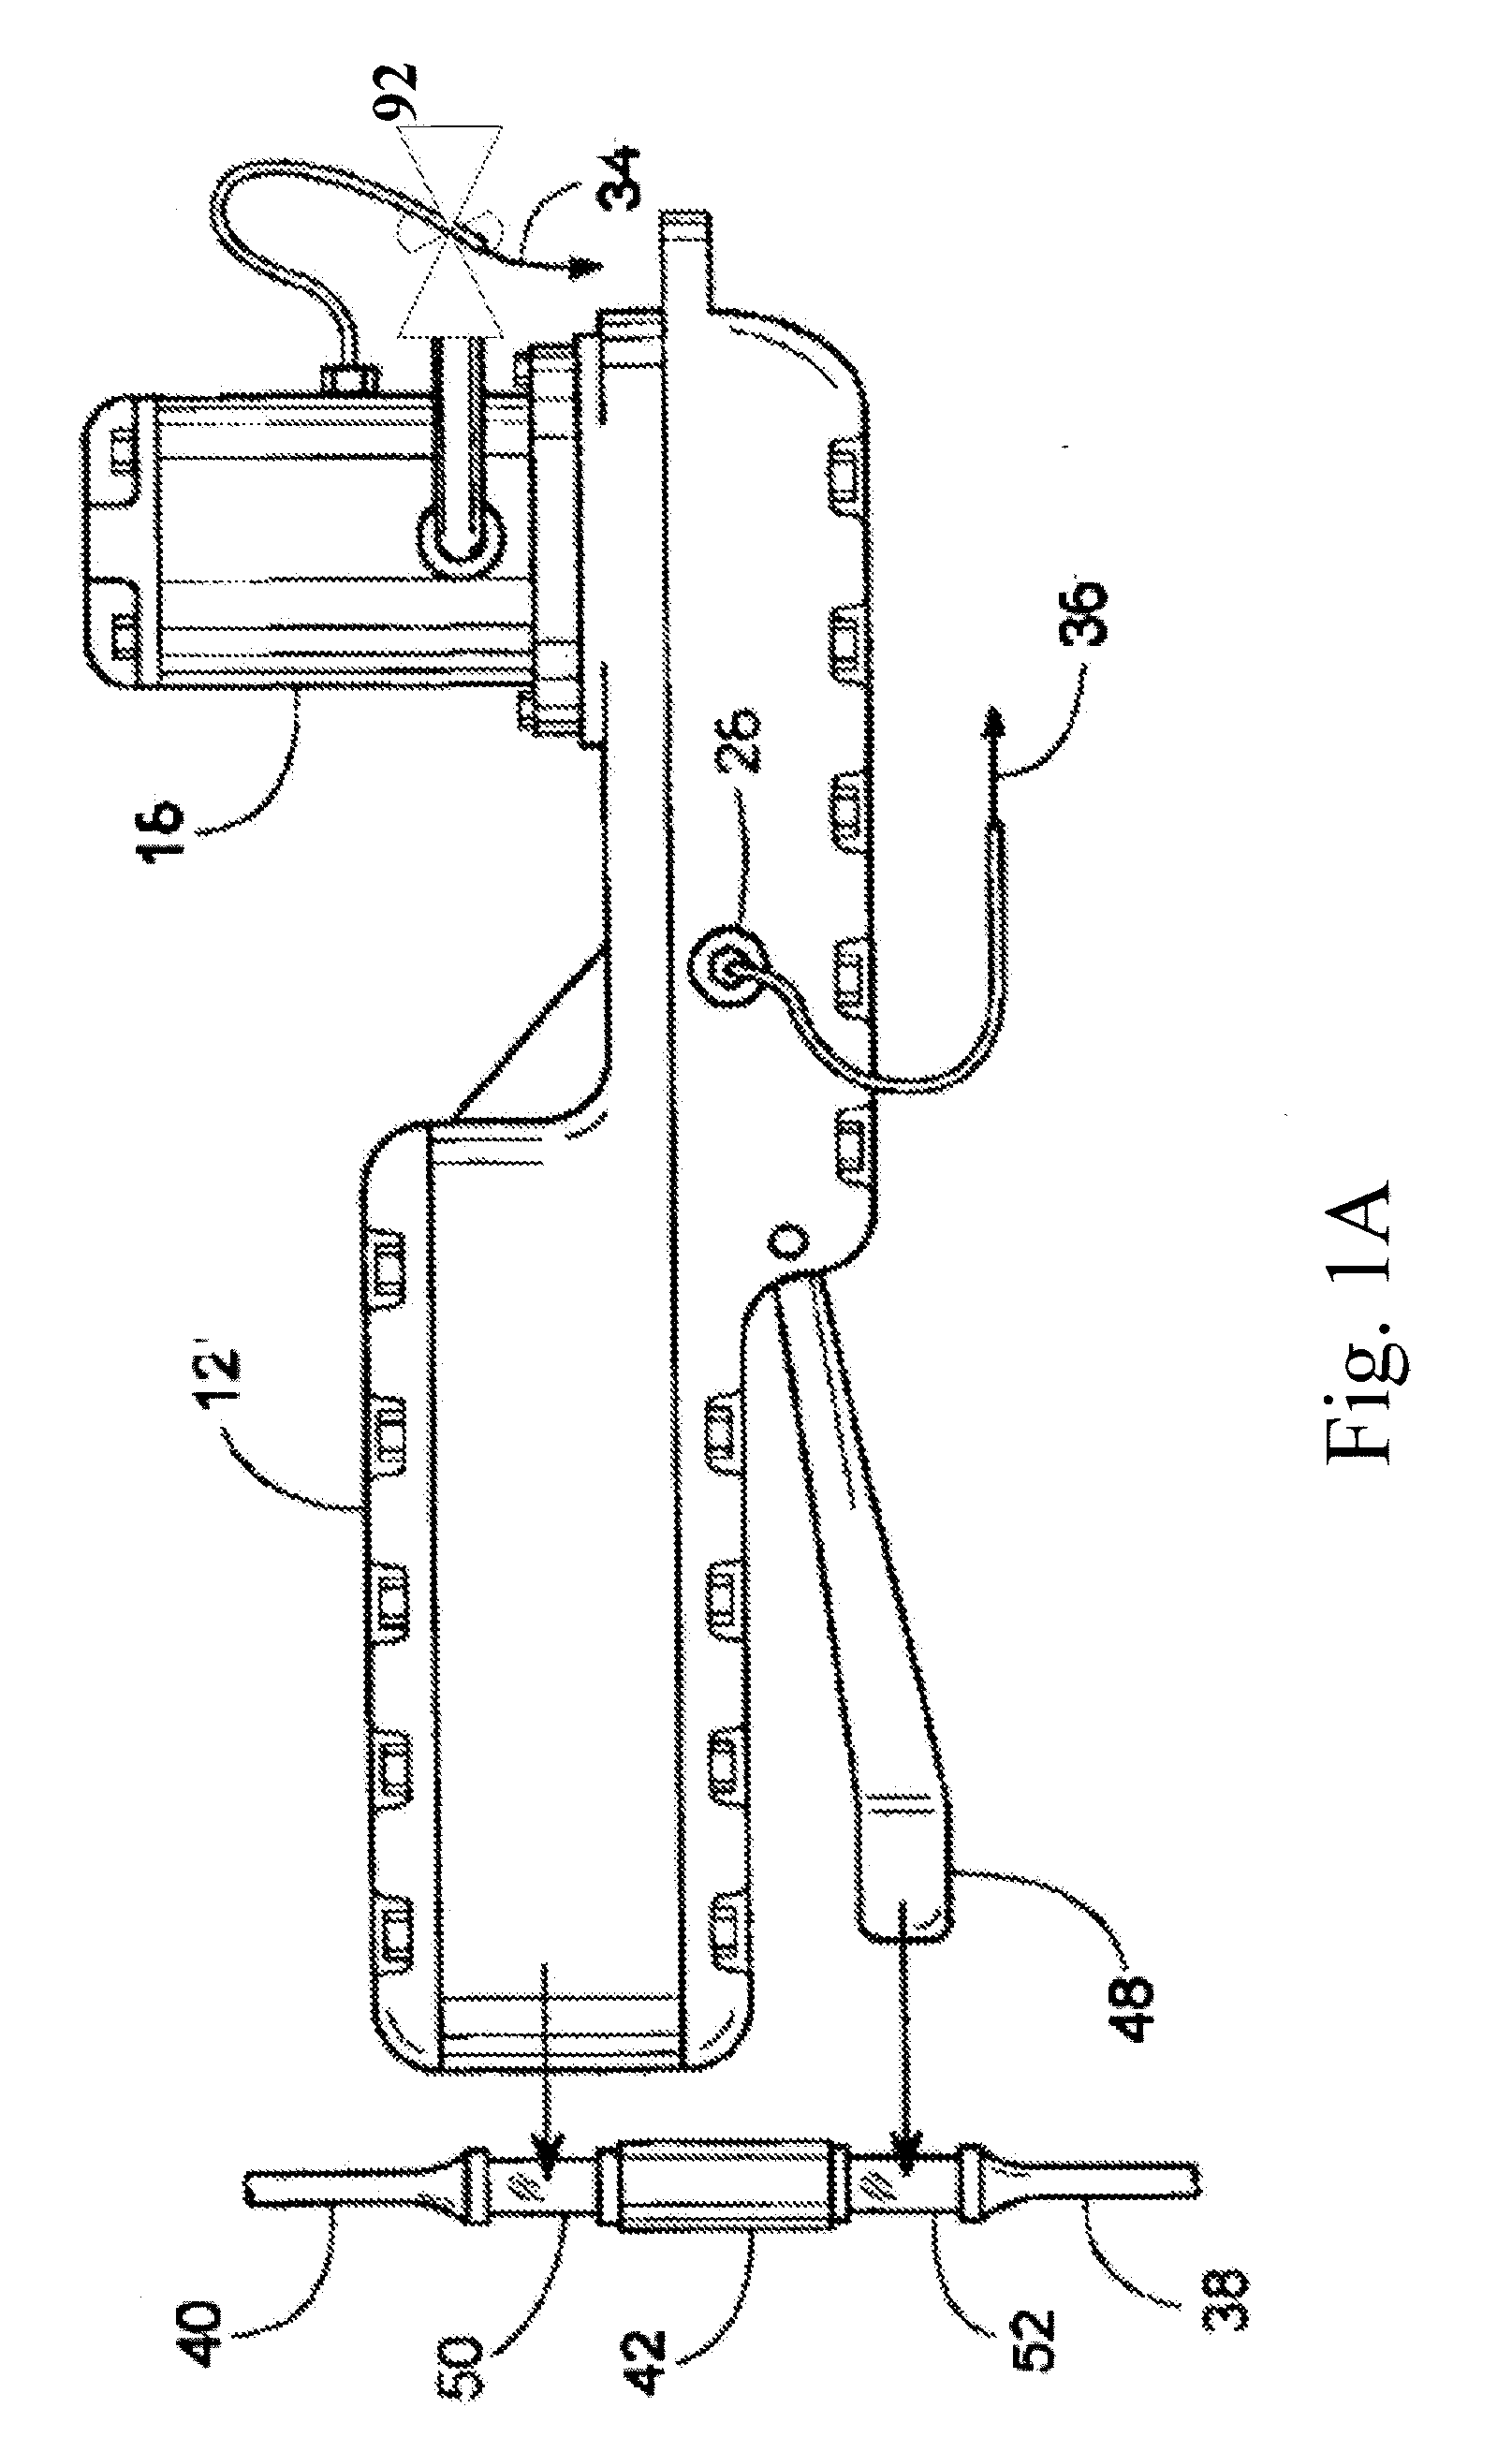 Method and System for Monitoring the Efficiency and Health of a Hydraulically Driven System